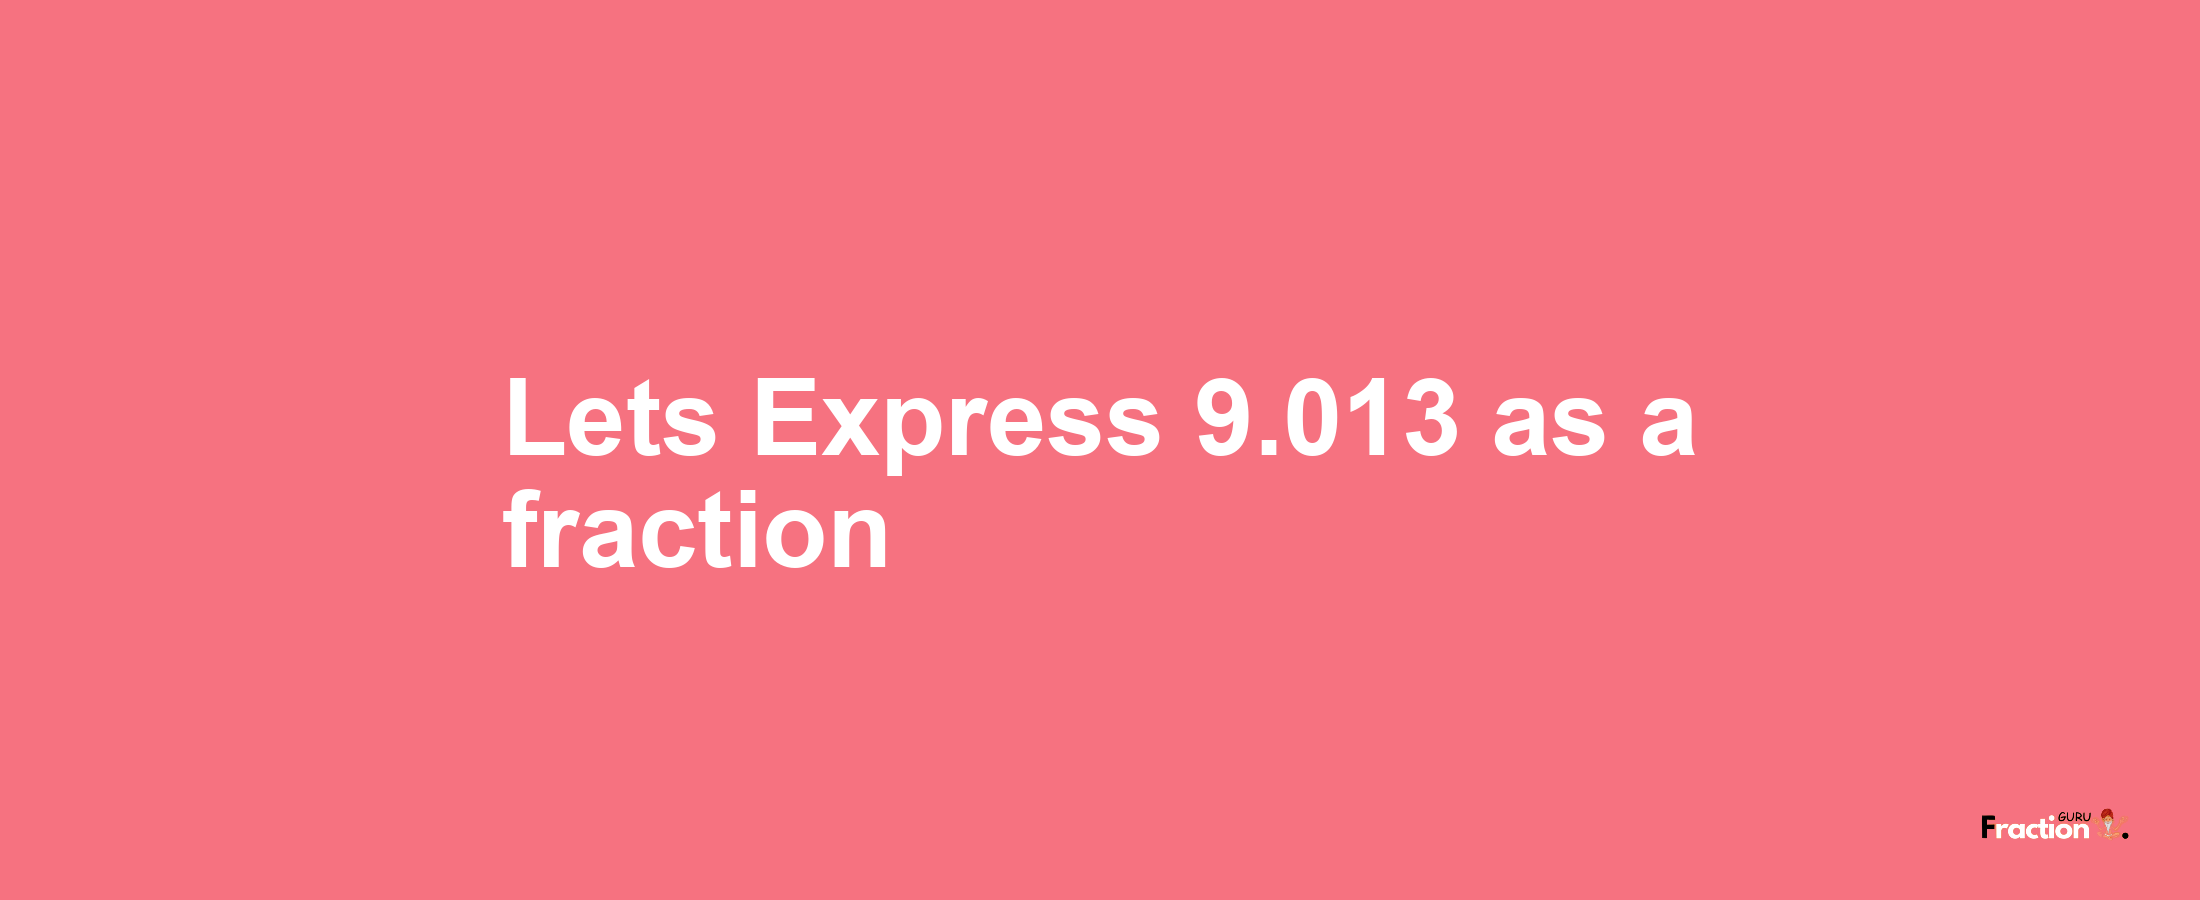 Lets Express 9.013 as afraction